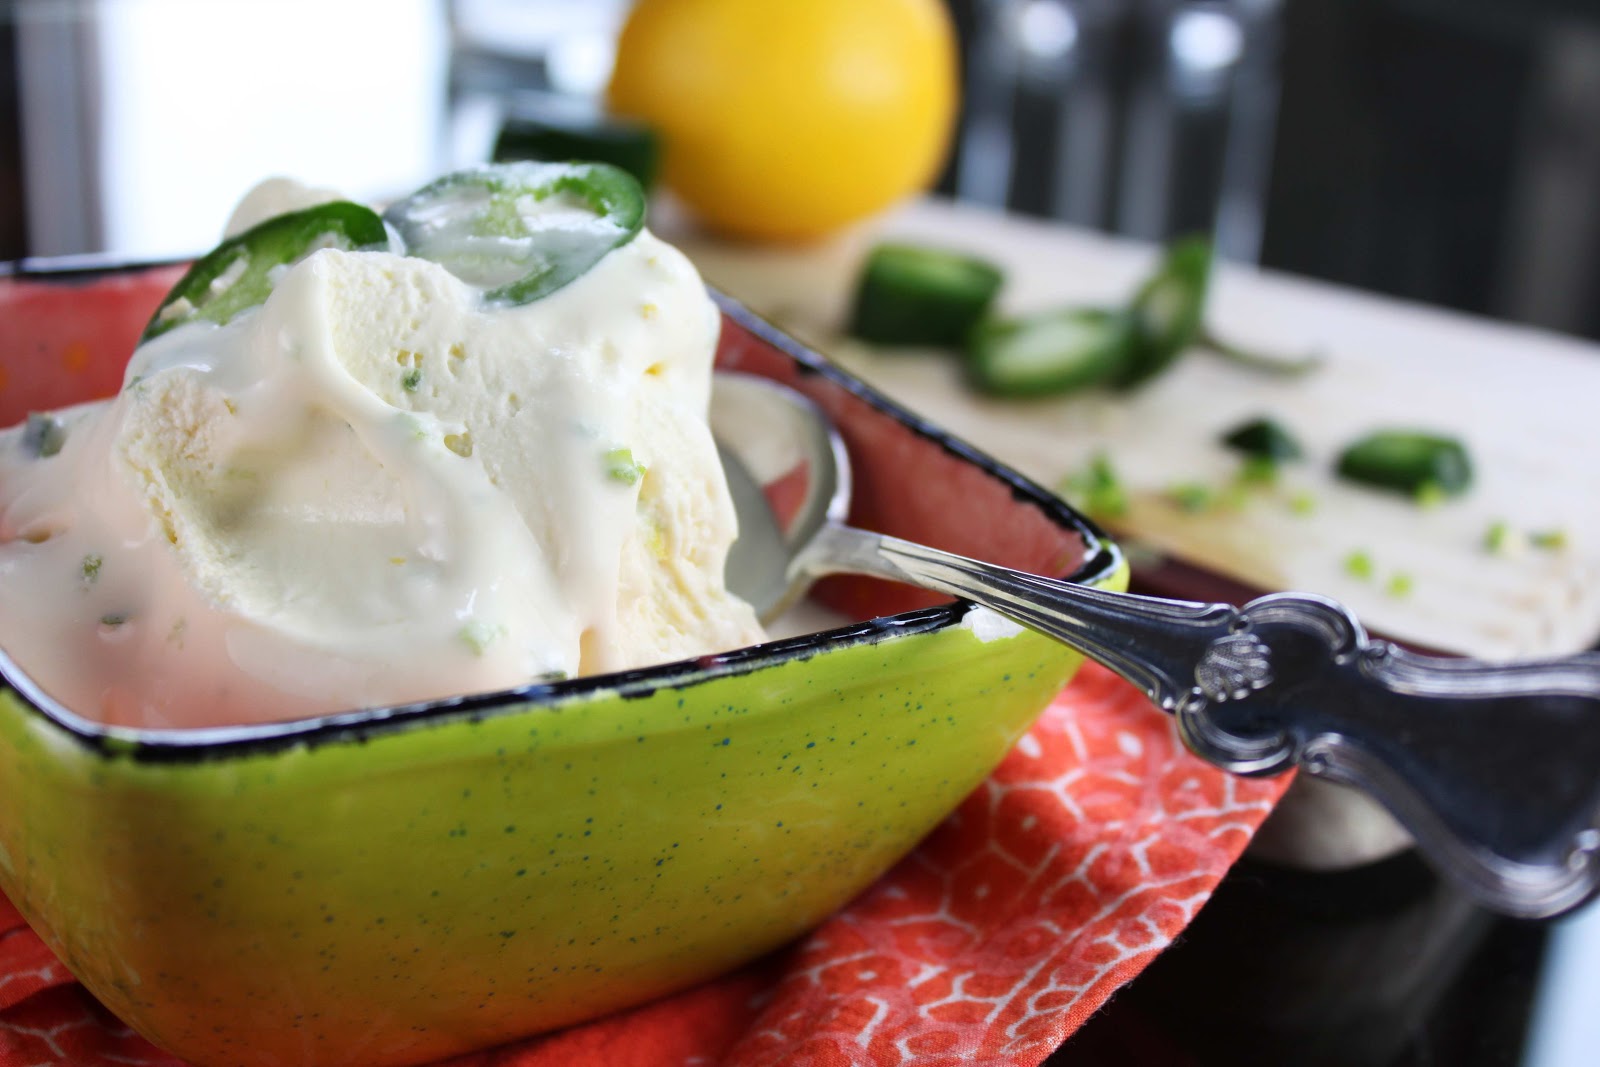 🍦 It’s Time to Vote “Yay” Or “Nay” On These Unusual Ice Cream Flavors Lemon jalapeno ice cream